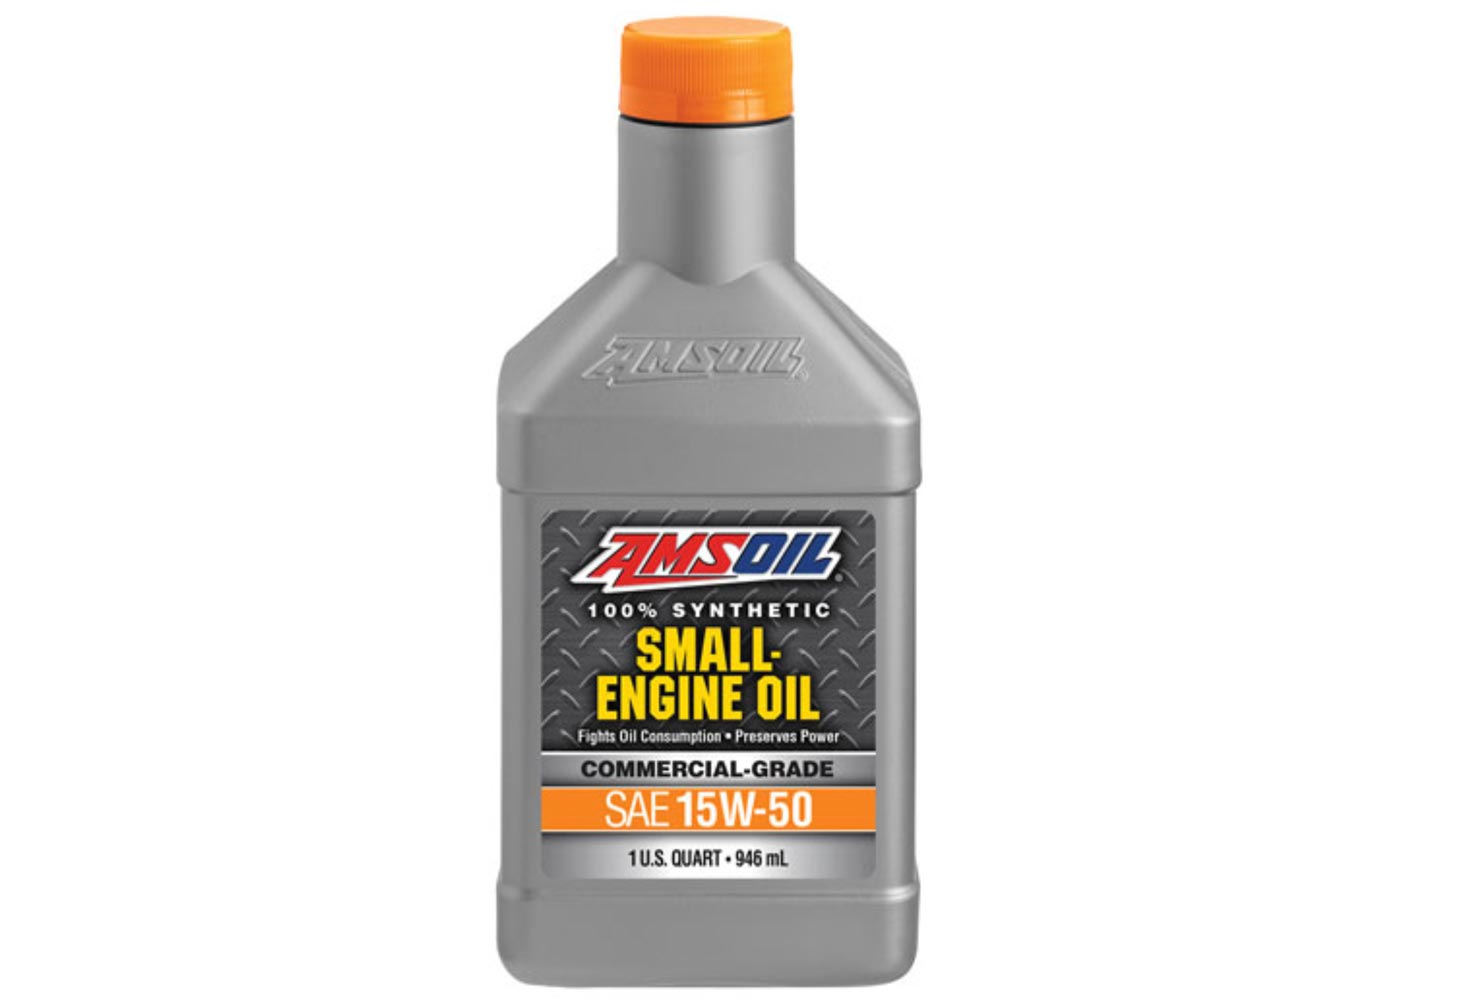 AMSOIL launches new 15W-50 synthetic small-engine oil